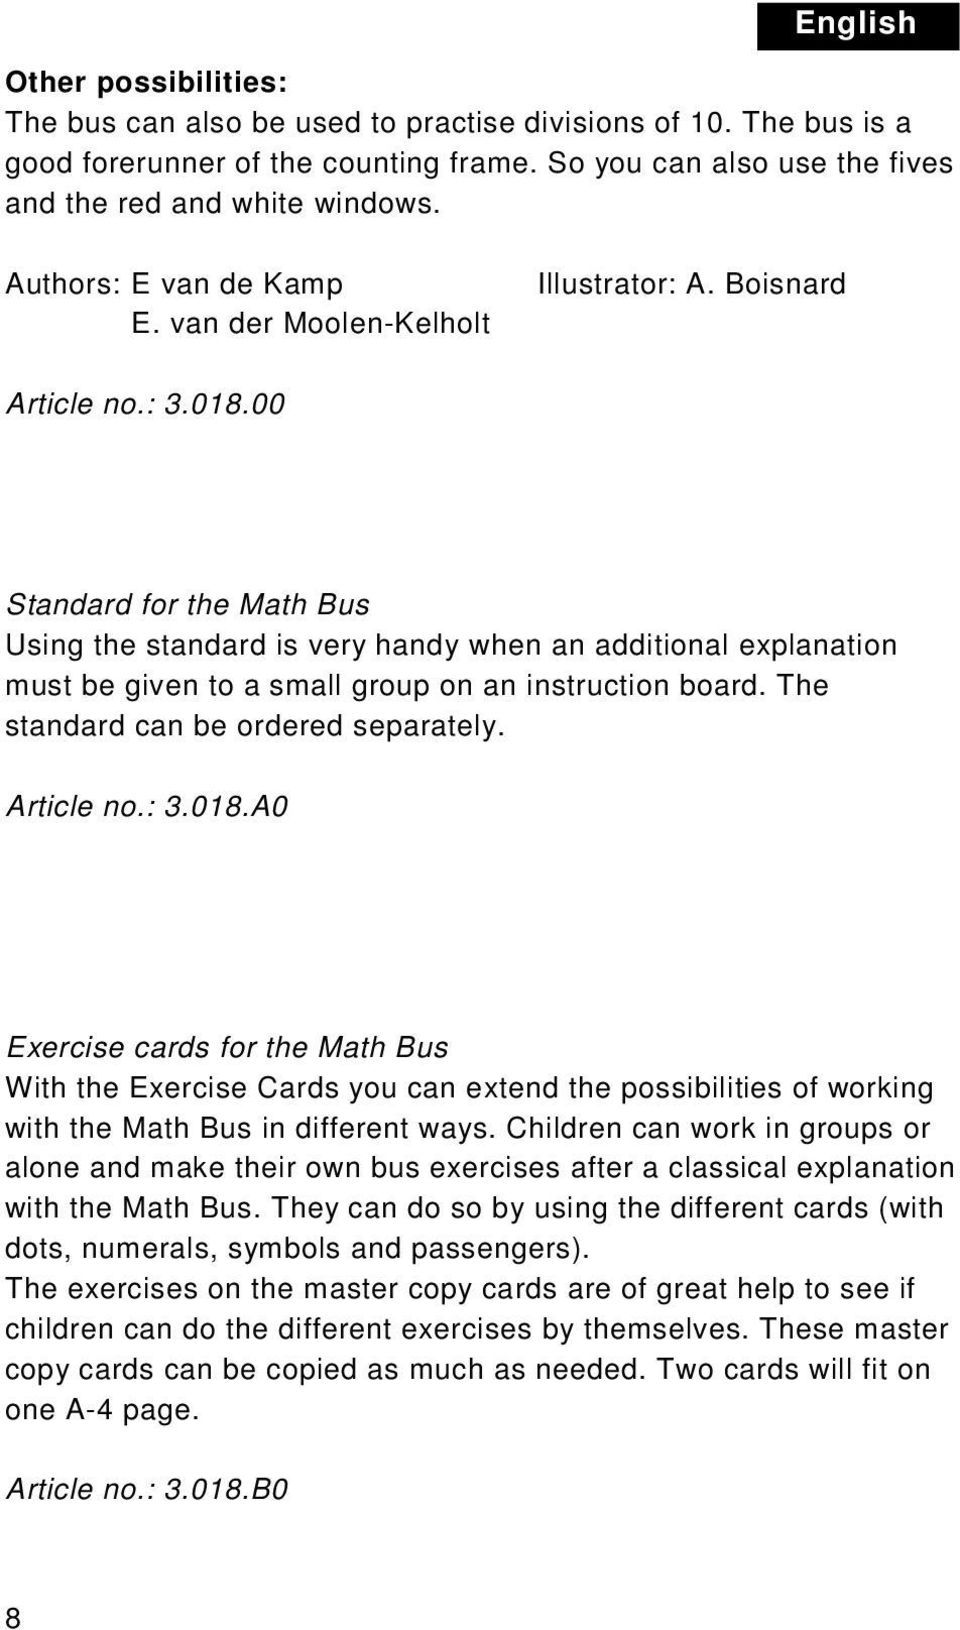 00 Standard for the Math Bus Using the standard is very handy when an additional explanation must be given to a small group on an instruction board. The standard can be ordered separately. Article no.